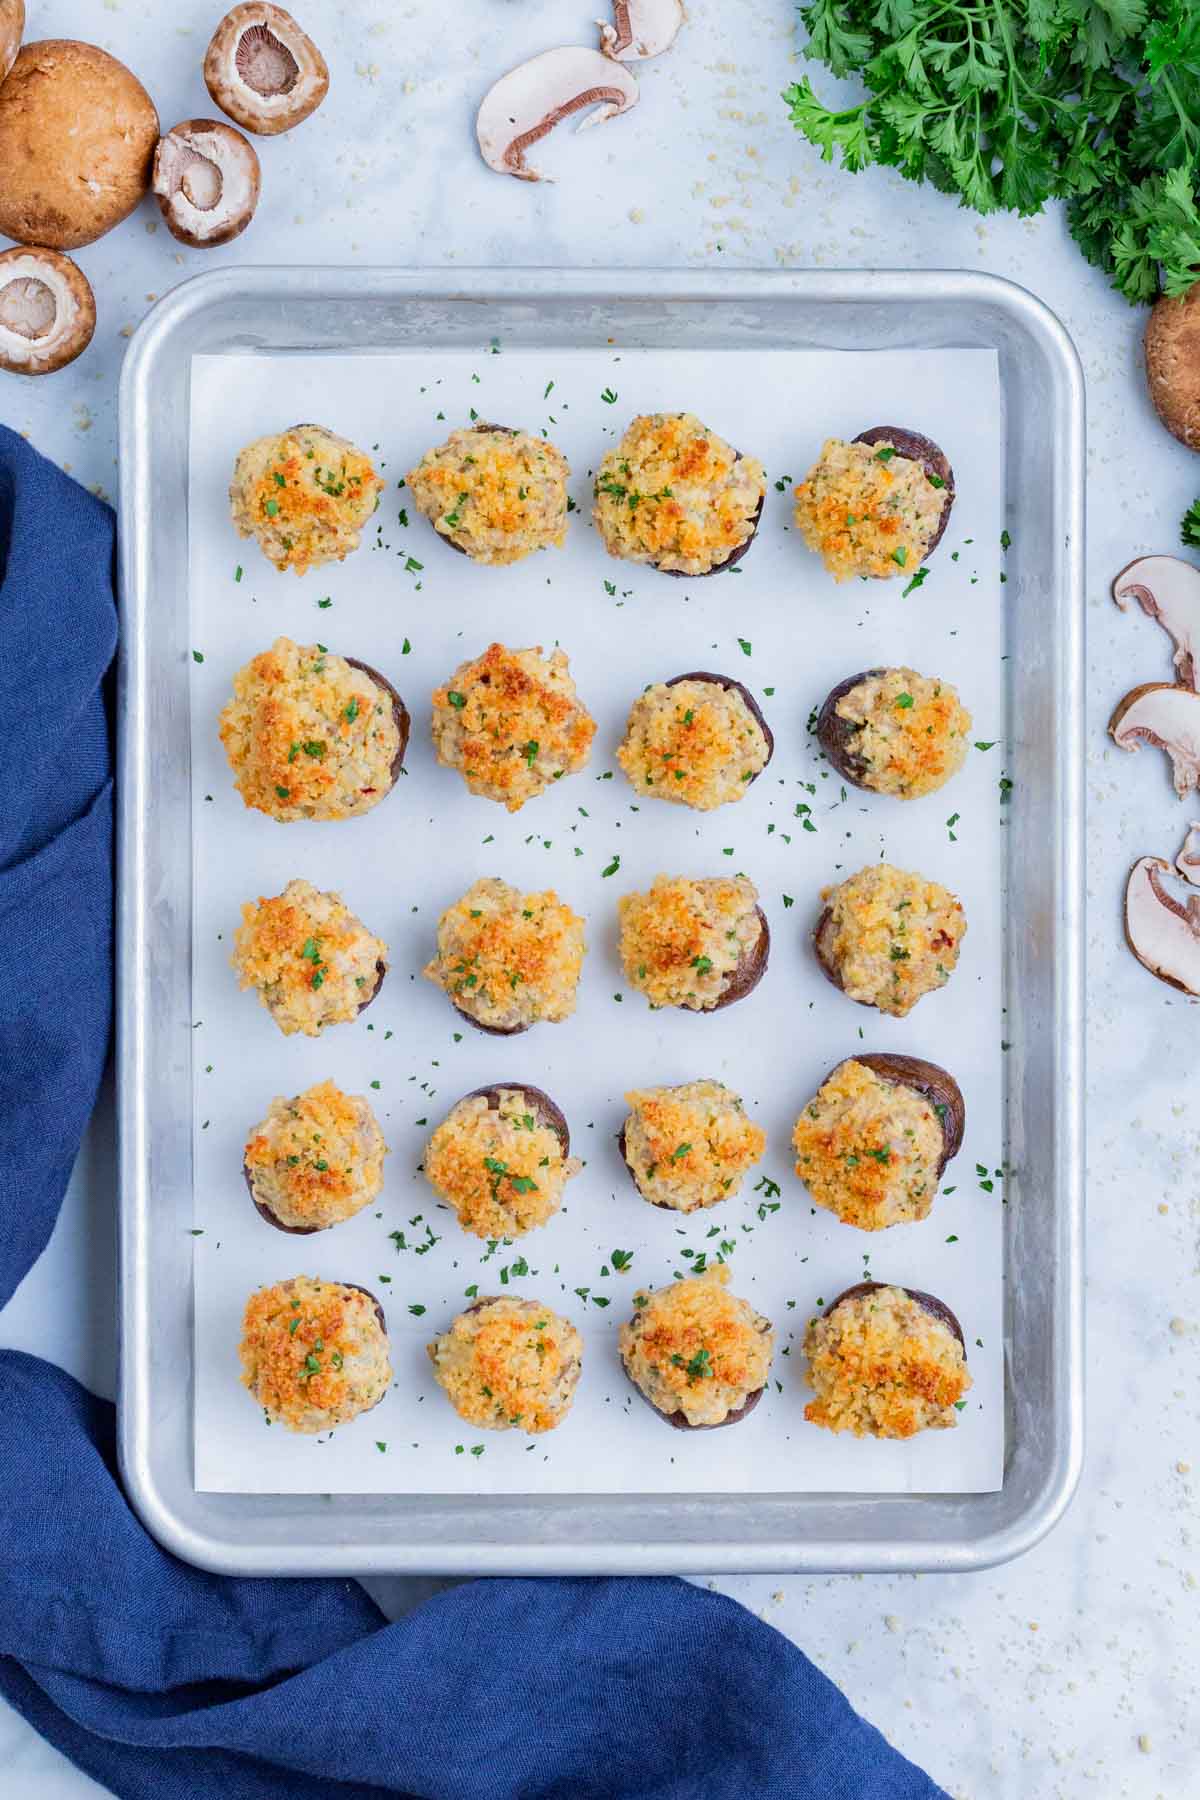 Stuffed mushrooms are baked in the oven until golden brown.